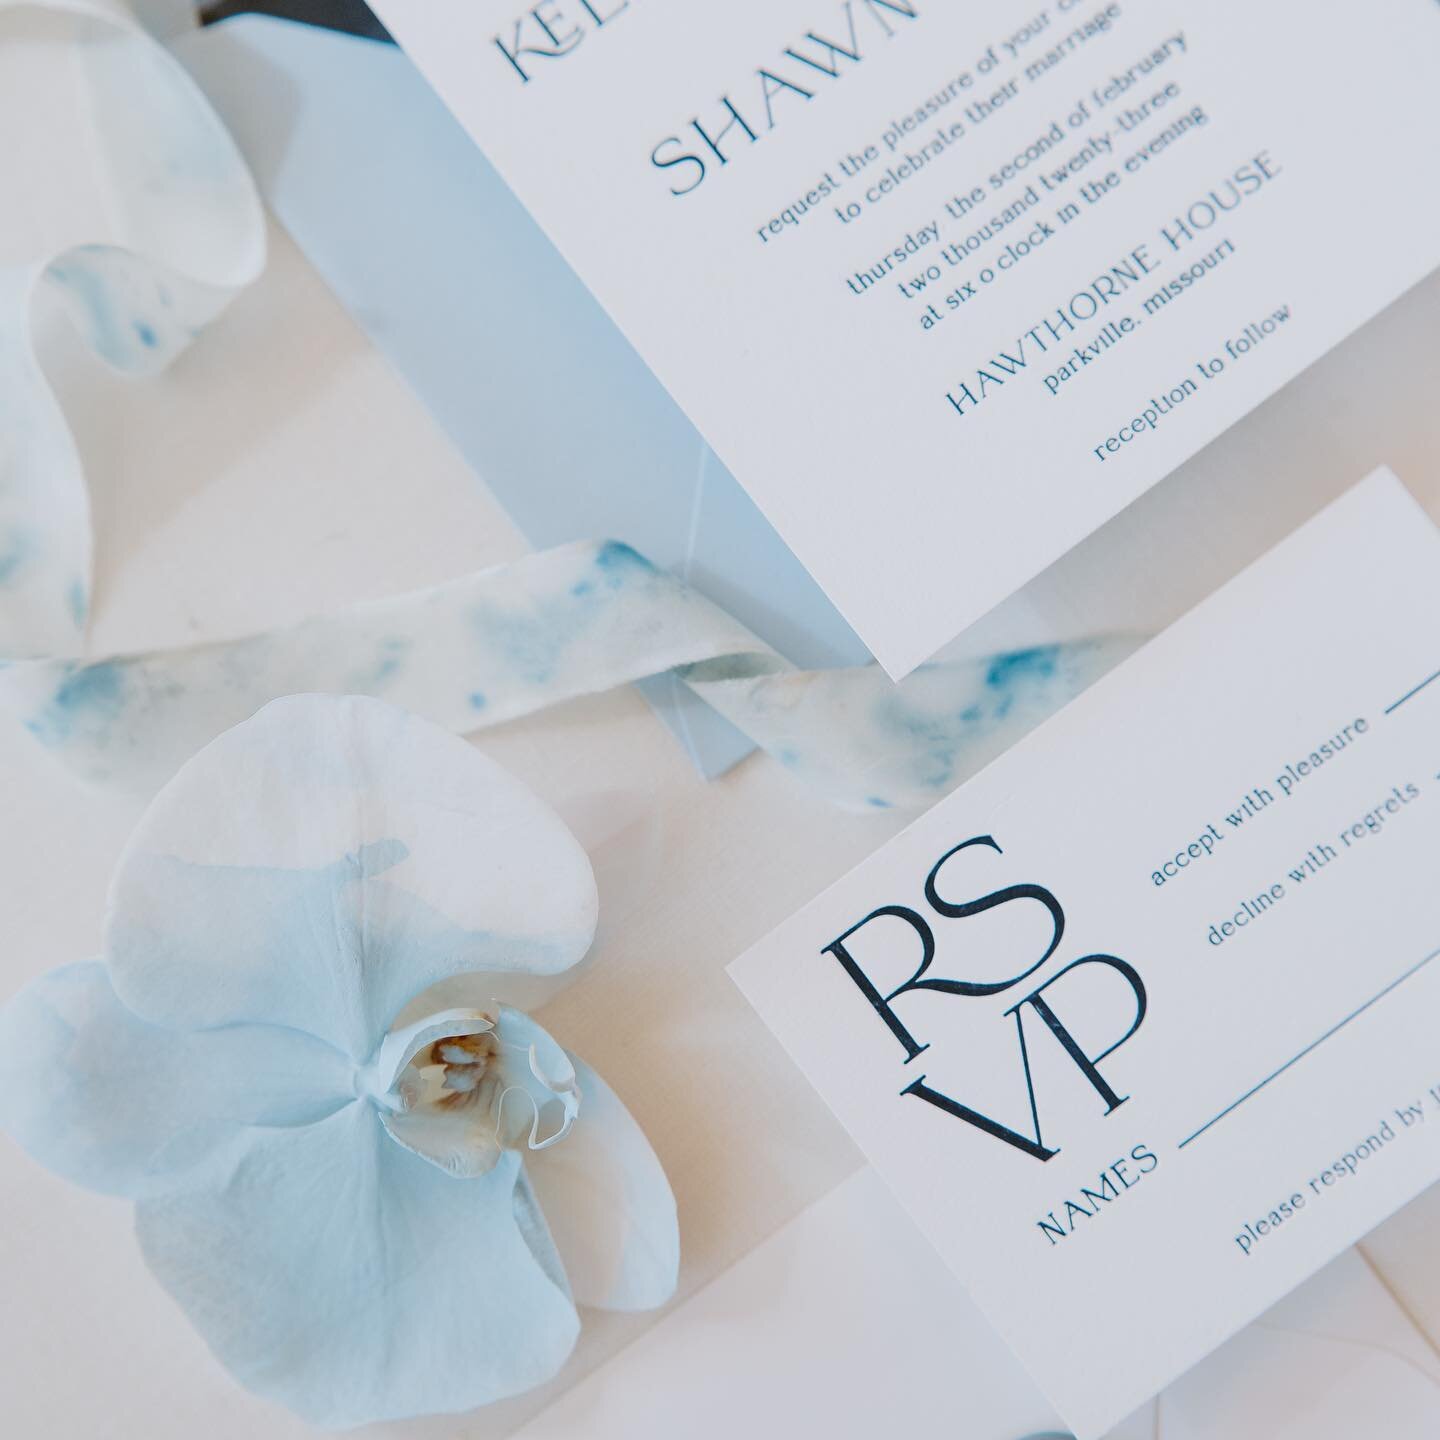 As a wedding stationery vendor, we know how much effort and care goes into planning the perfect wedding. That's why we want to remind all guests of the importance of RSVPing in a timely manner, especially during the busy wedding season.

By RSVPing b